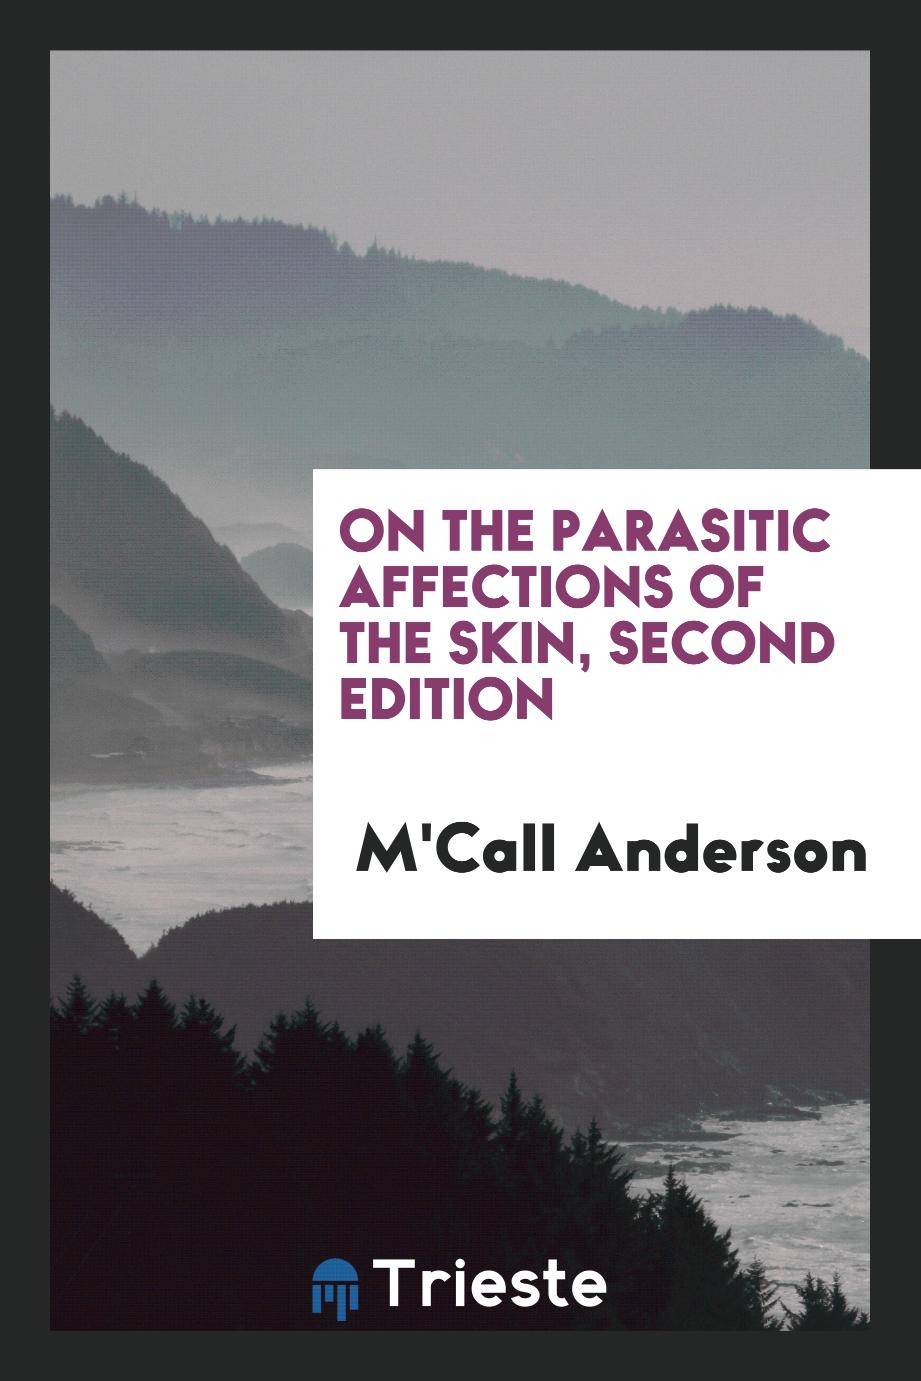 On the parasitic affections of the skin, Second Edition